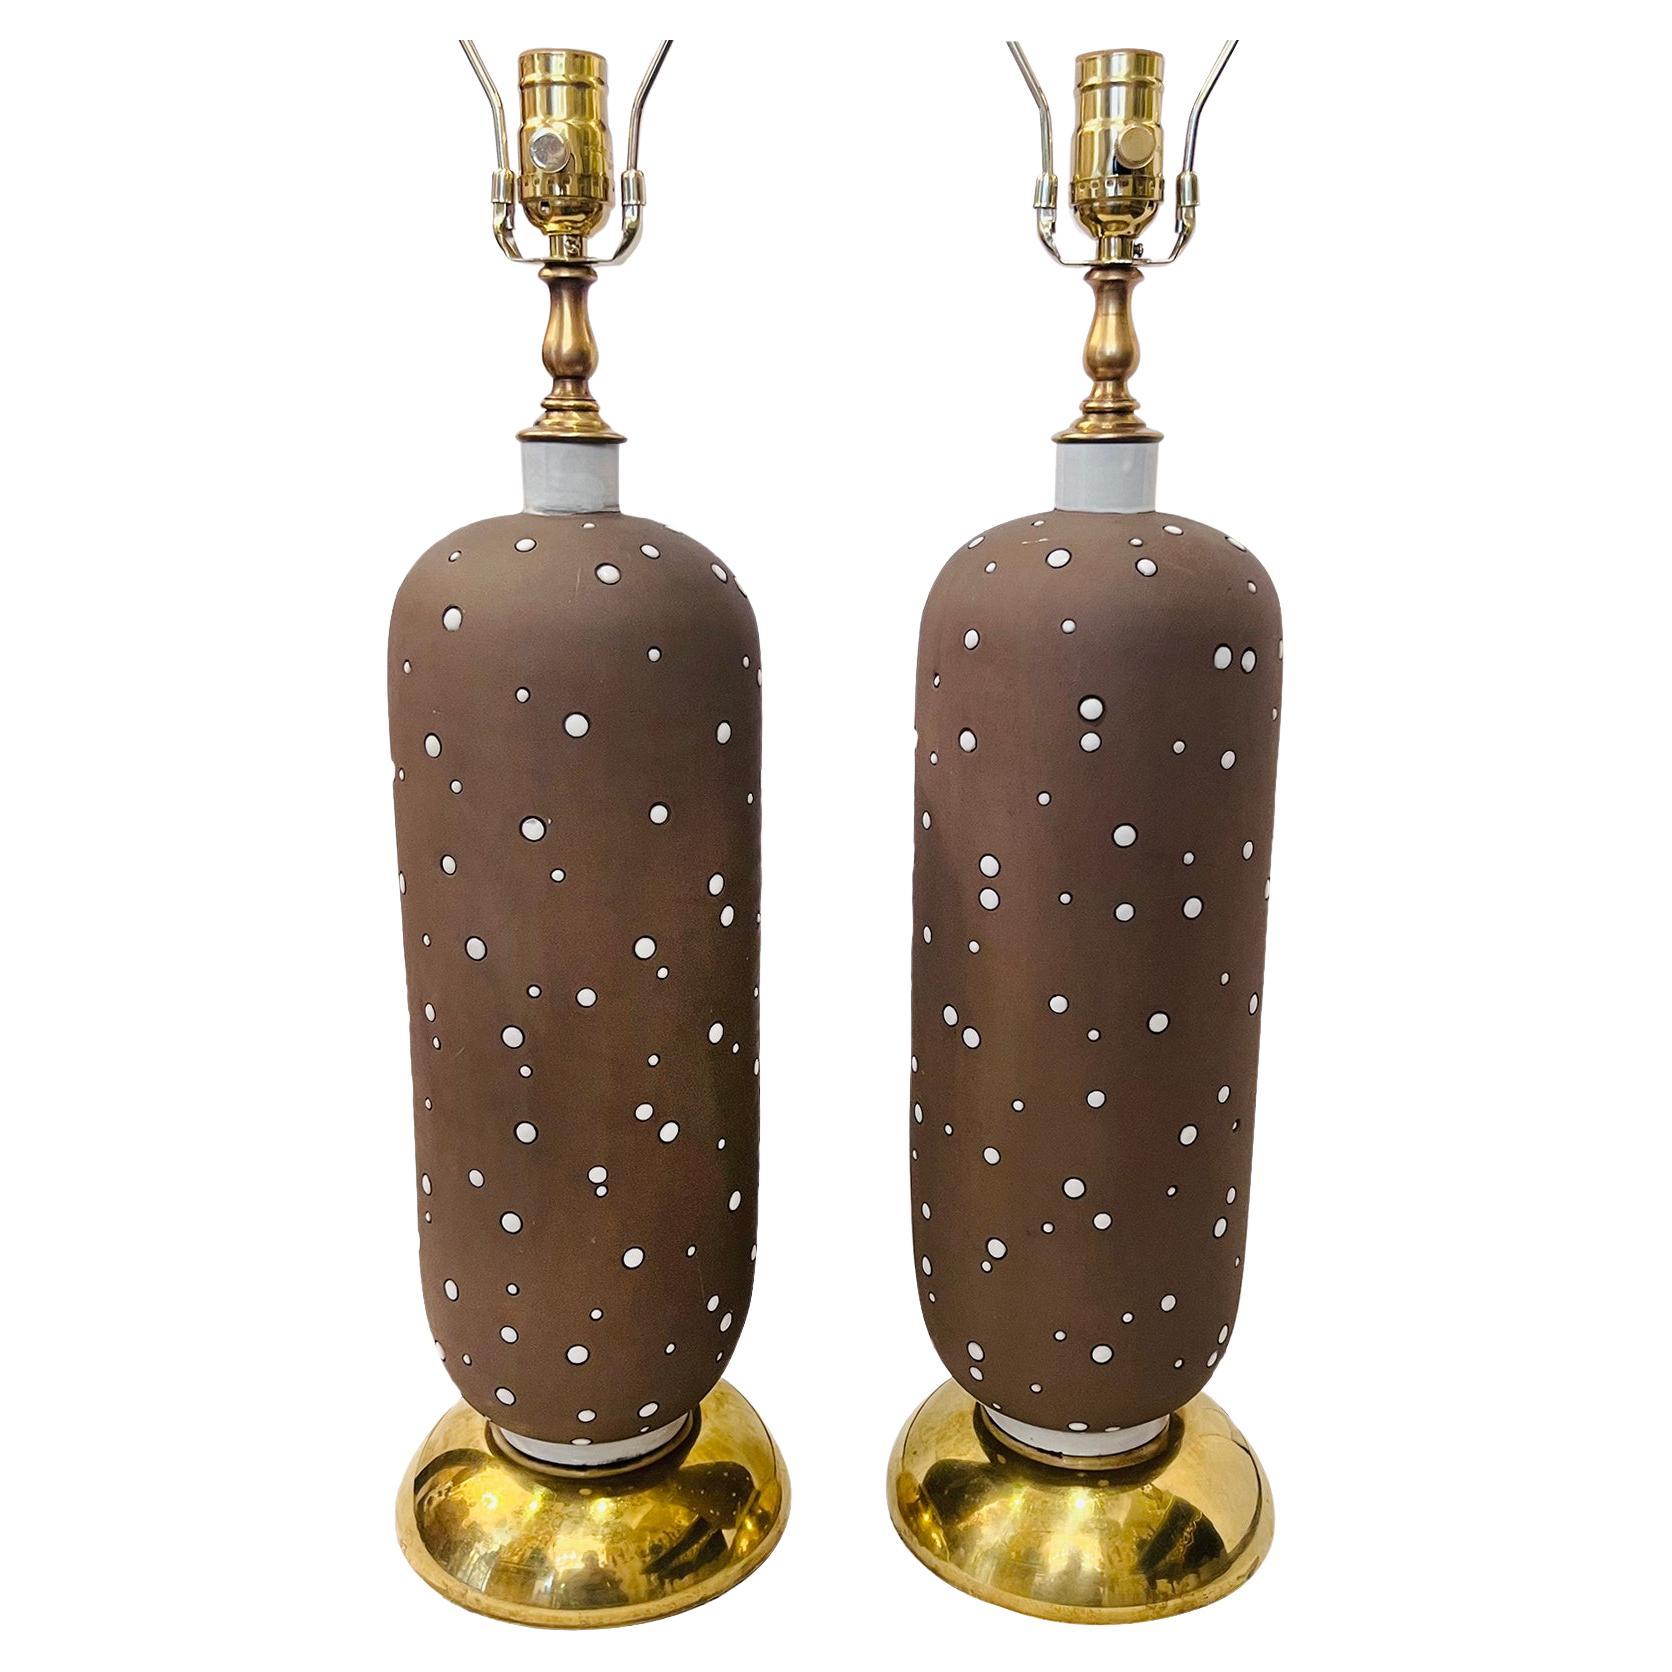 Pair of Midcentury French Porcelain Lamps